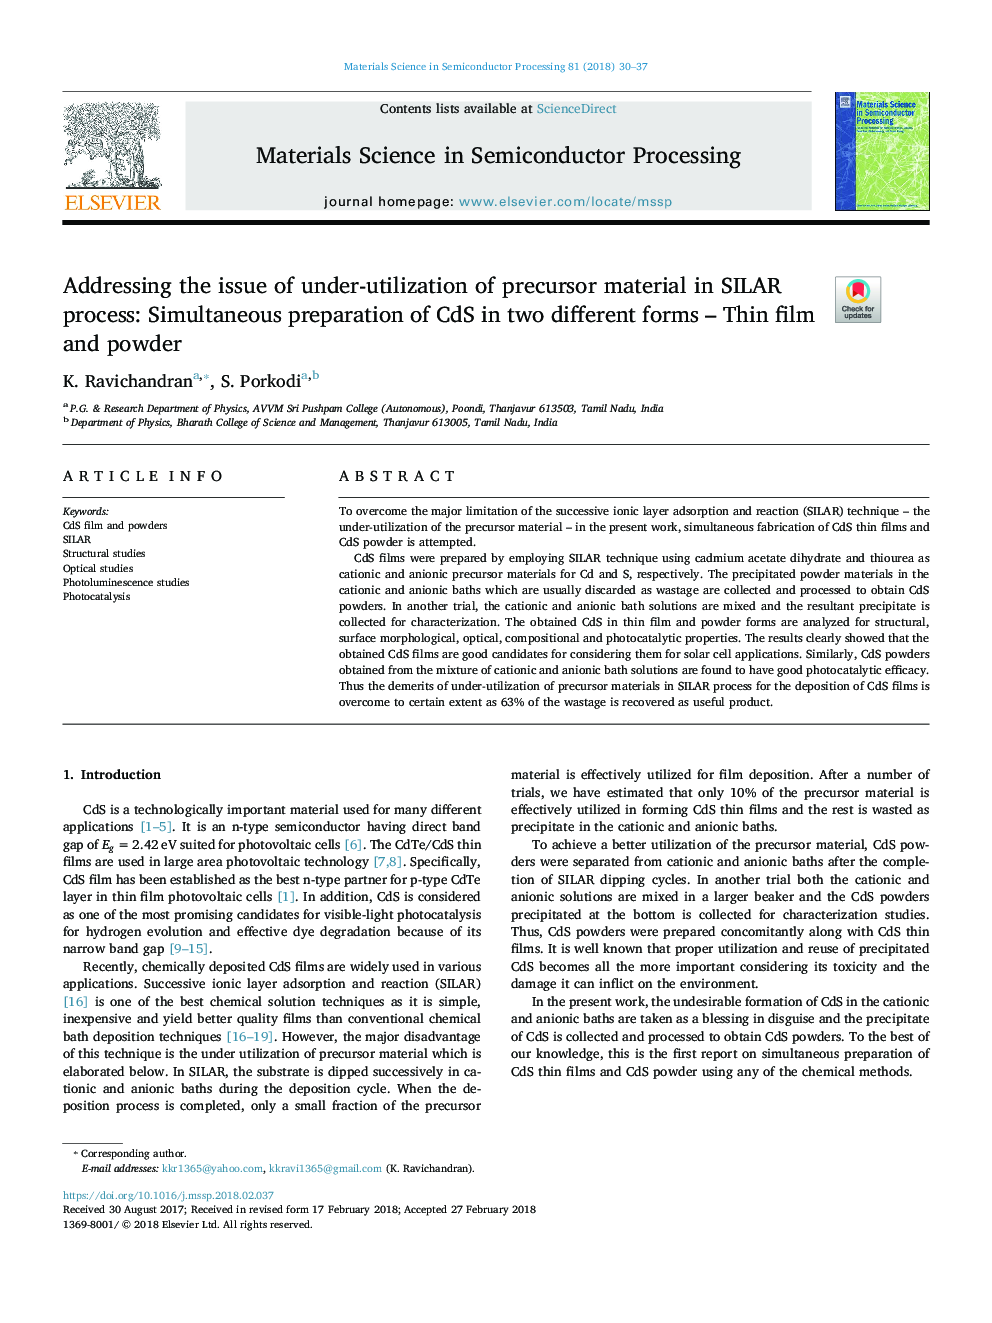 Addressing the issue of under-utilization of precursor material in SILAR process: Simultaneous preparation of CdS in two different forms - Thin film and powder